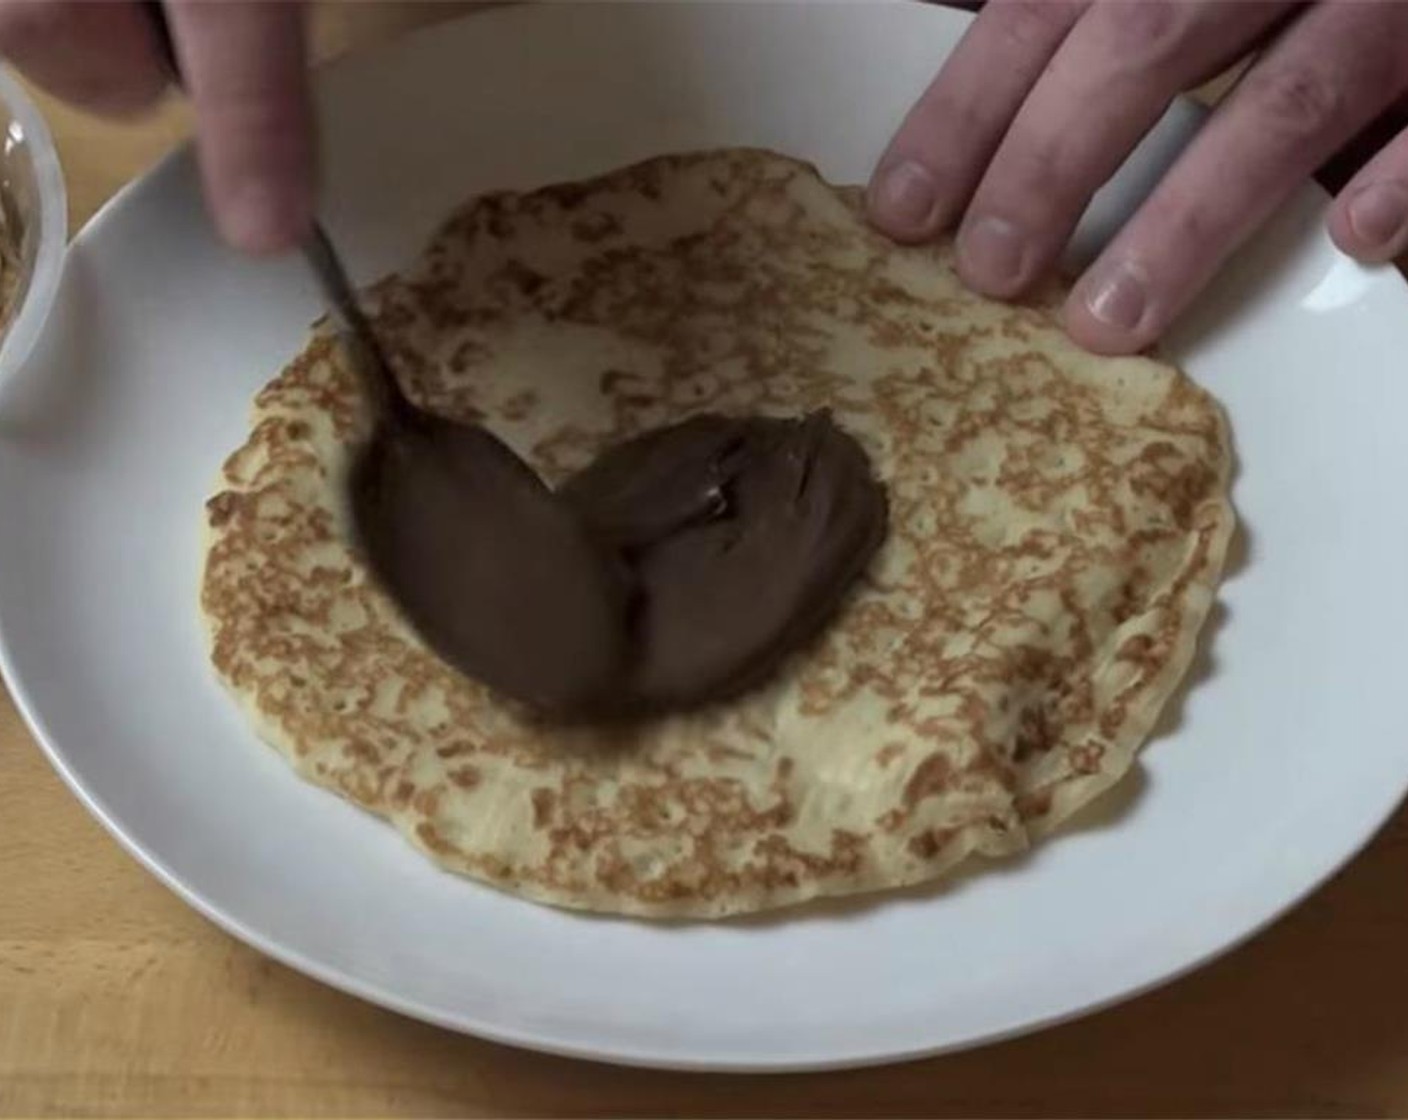 step 3 On your serving plate, place one of the Crepes (24 pieces) and dollop a tablespoon from the Nutella® (1 cup). Gently spread the Nutella with the back of a spoon.